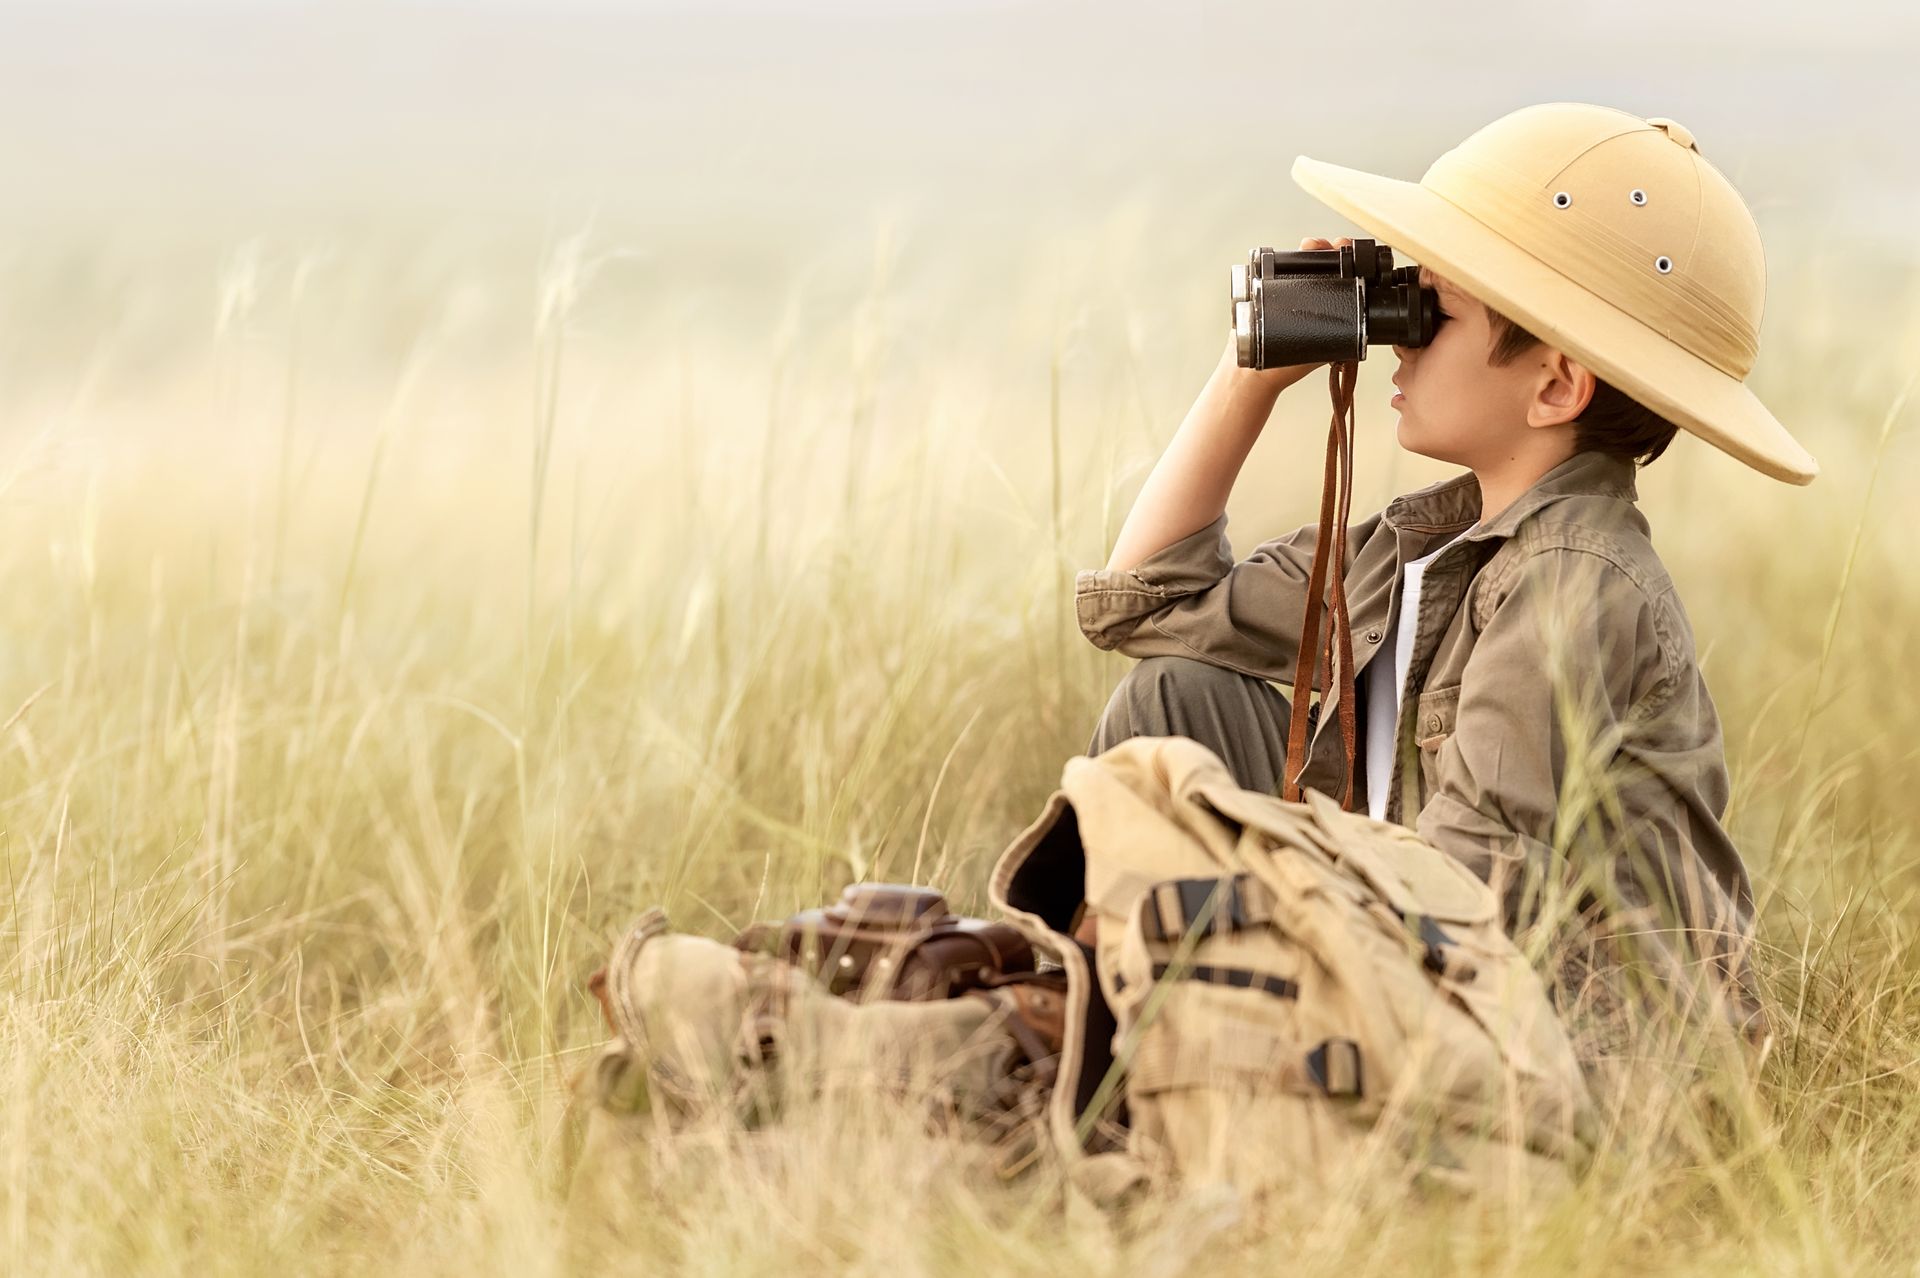 A young boy is sitting in a field looking through binoculars